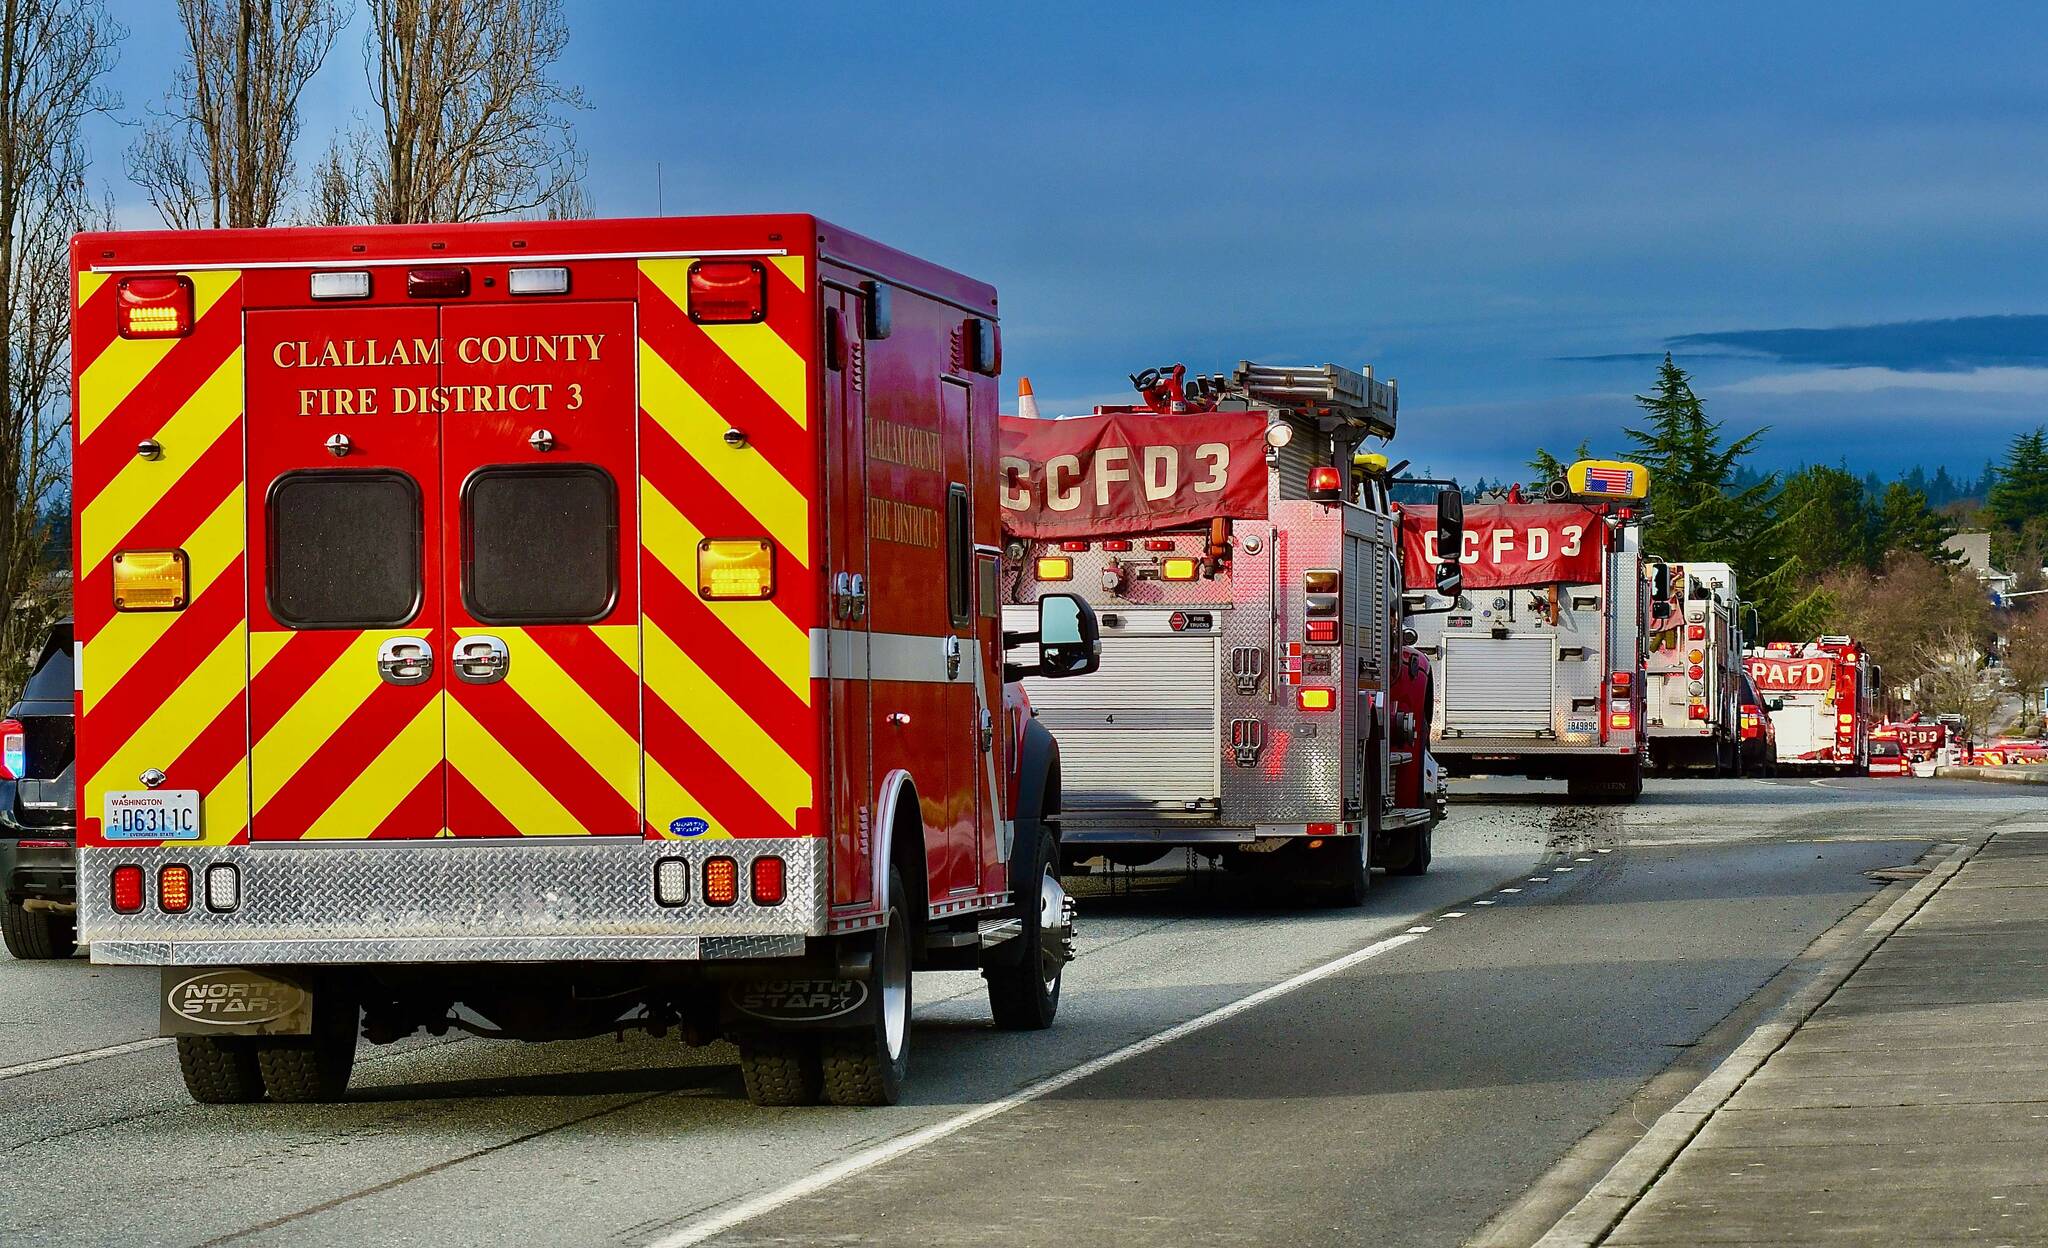 Photo by Jay Cline
First responders honor the passing of Capt. Charles “Chad” Cate with a procession of vehicles on Jan. 13, pictured here coming into Sequim off U.S. Highway 101.